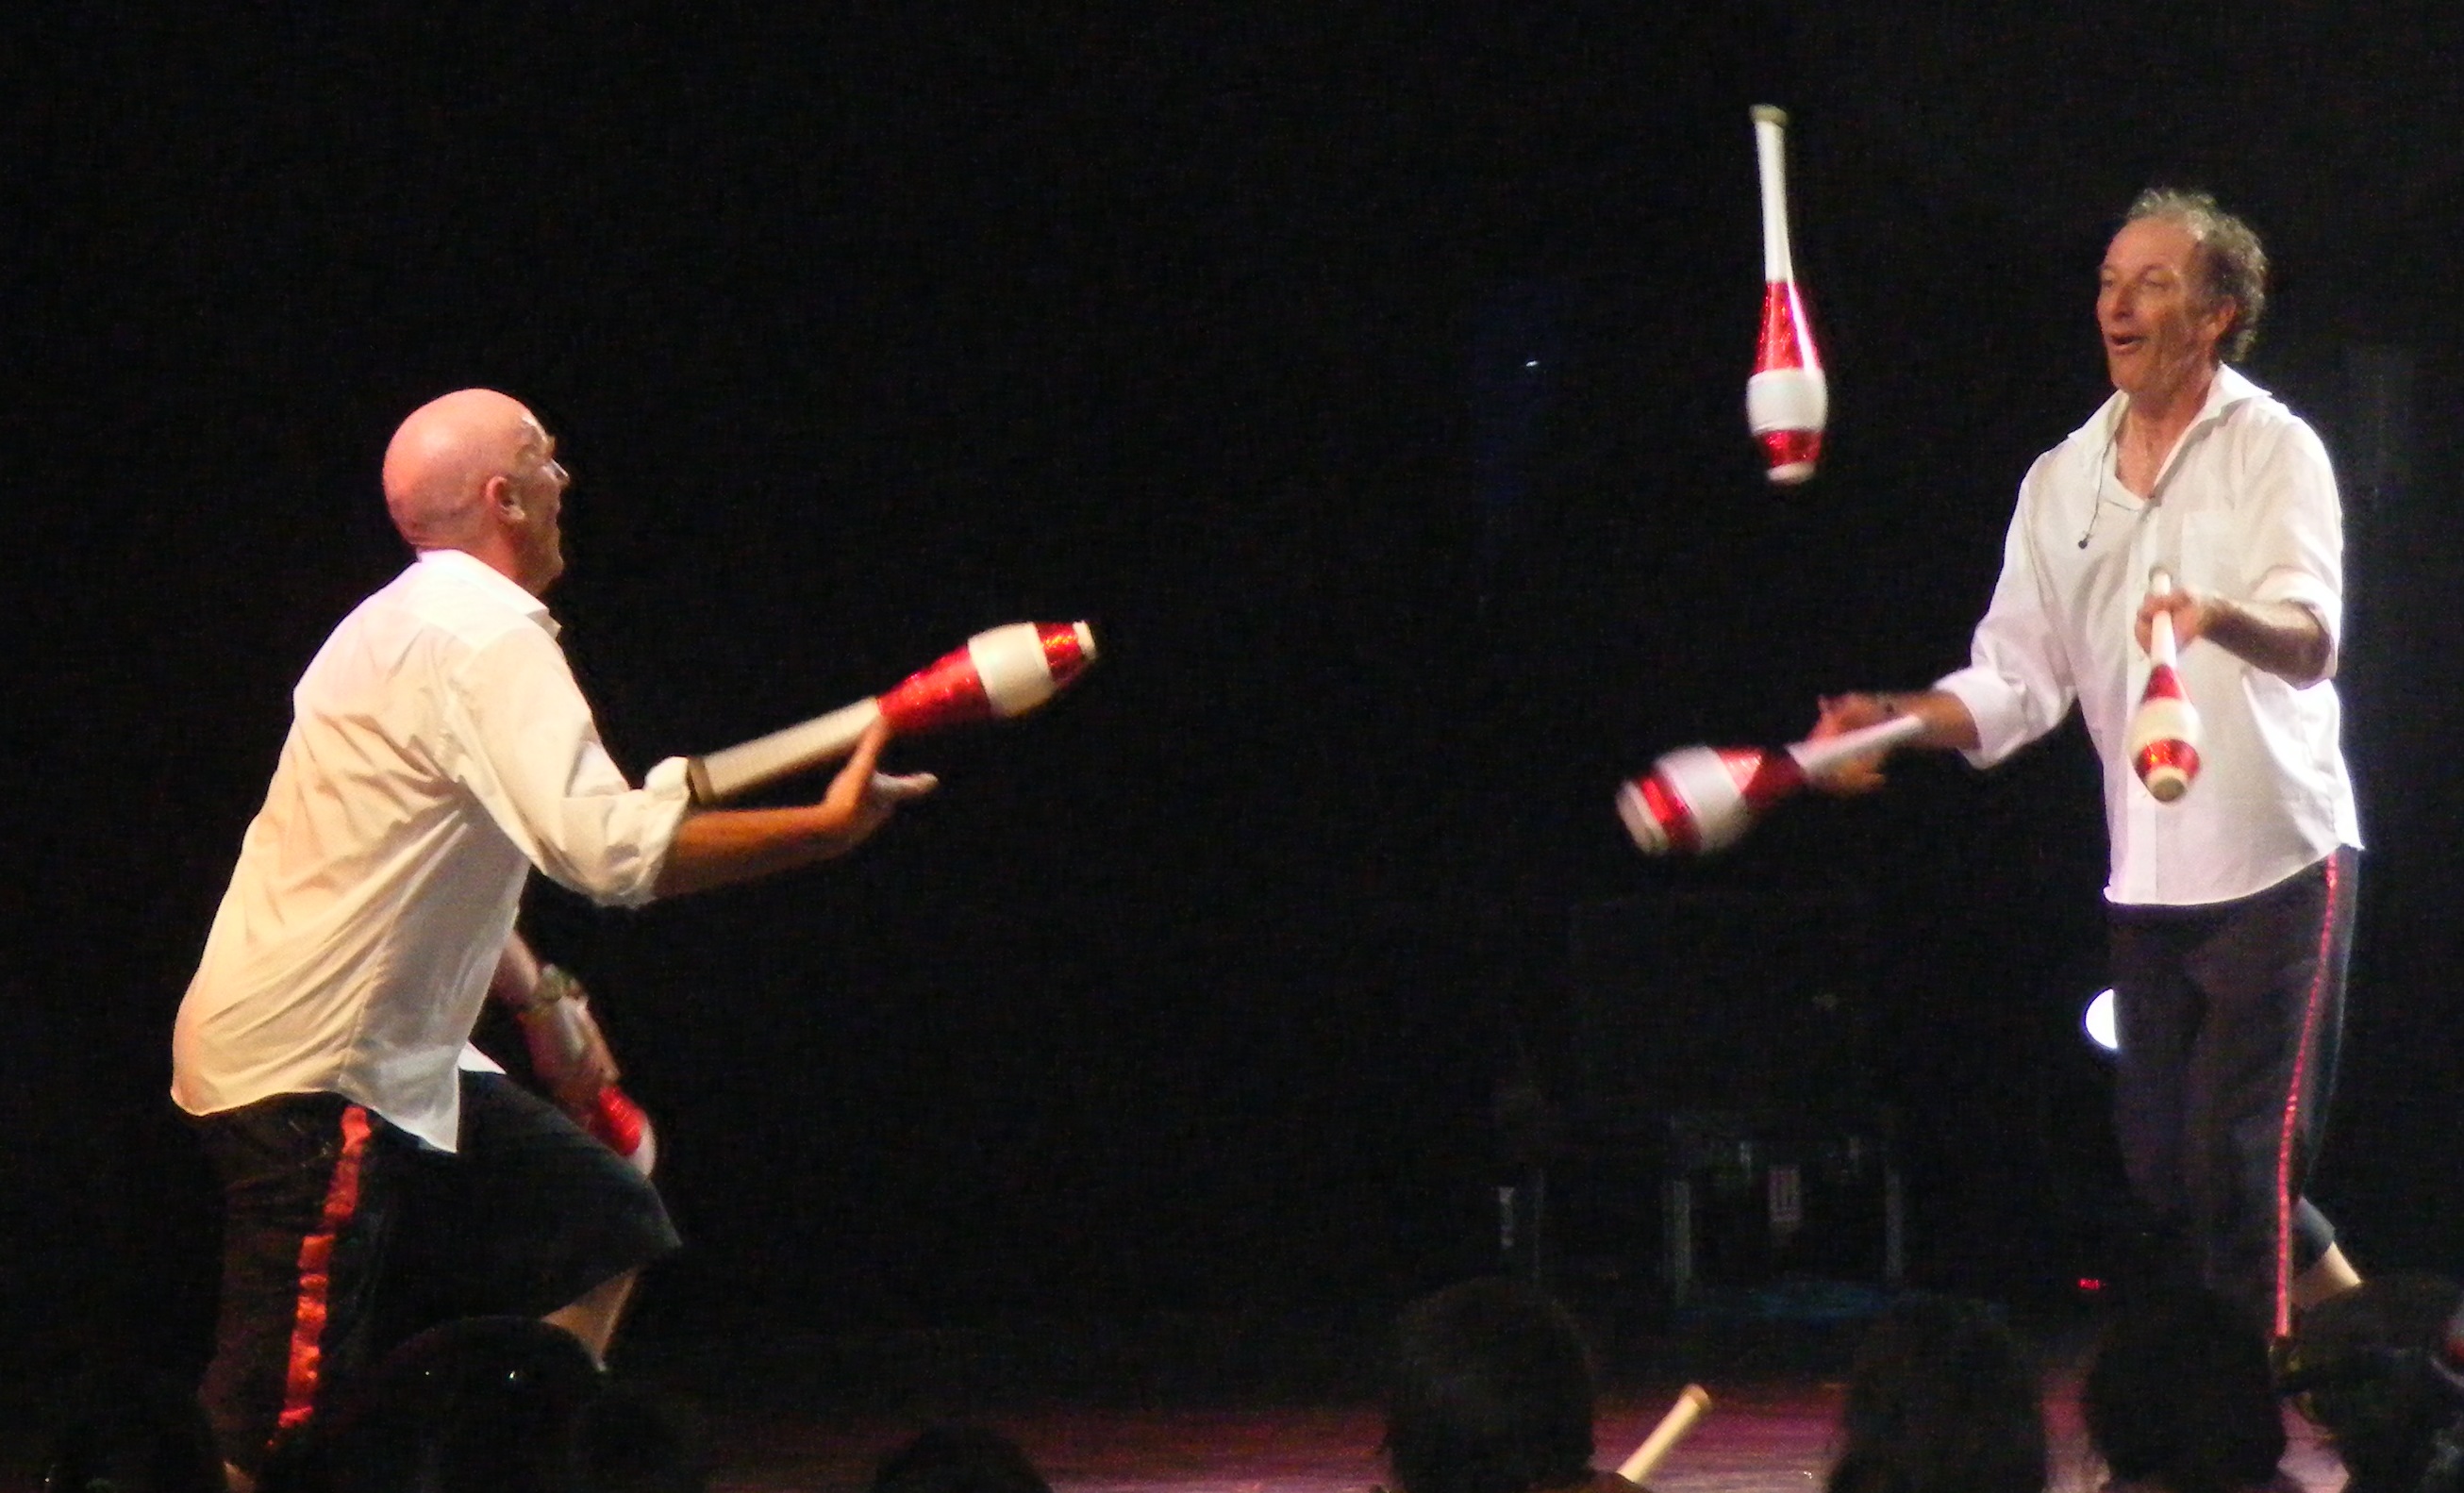 The European Juggling Convention 2019 - Review - Newark on